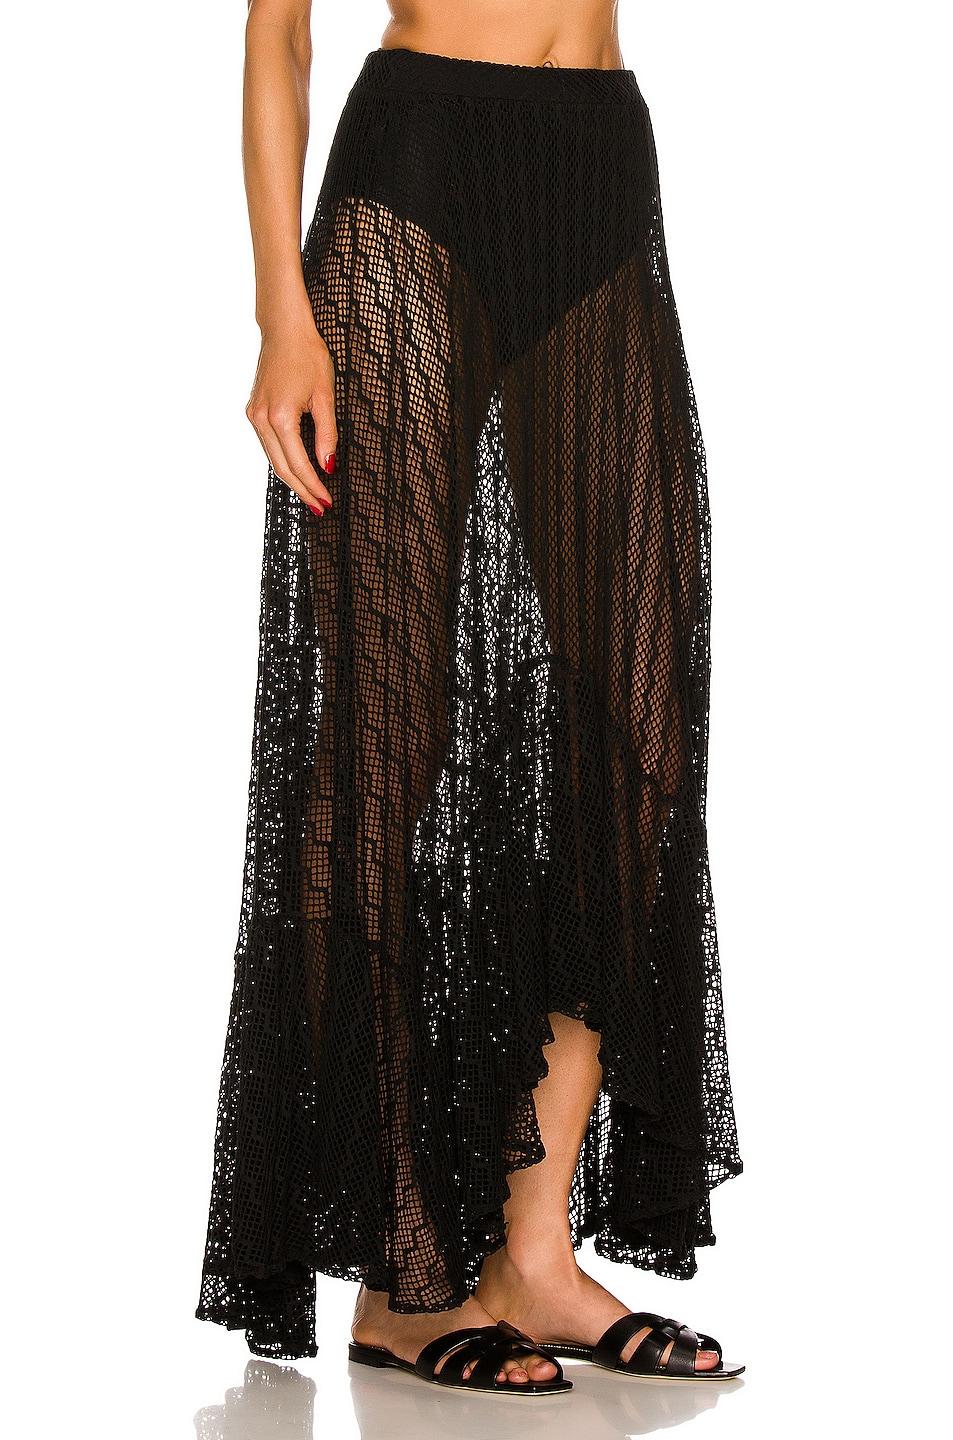 PATBO Lace Beach Skirt in Black | Lyst